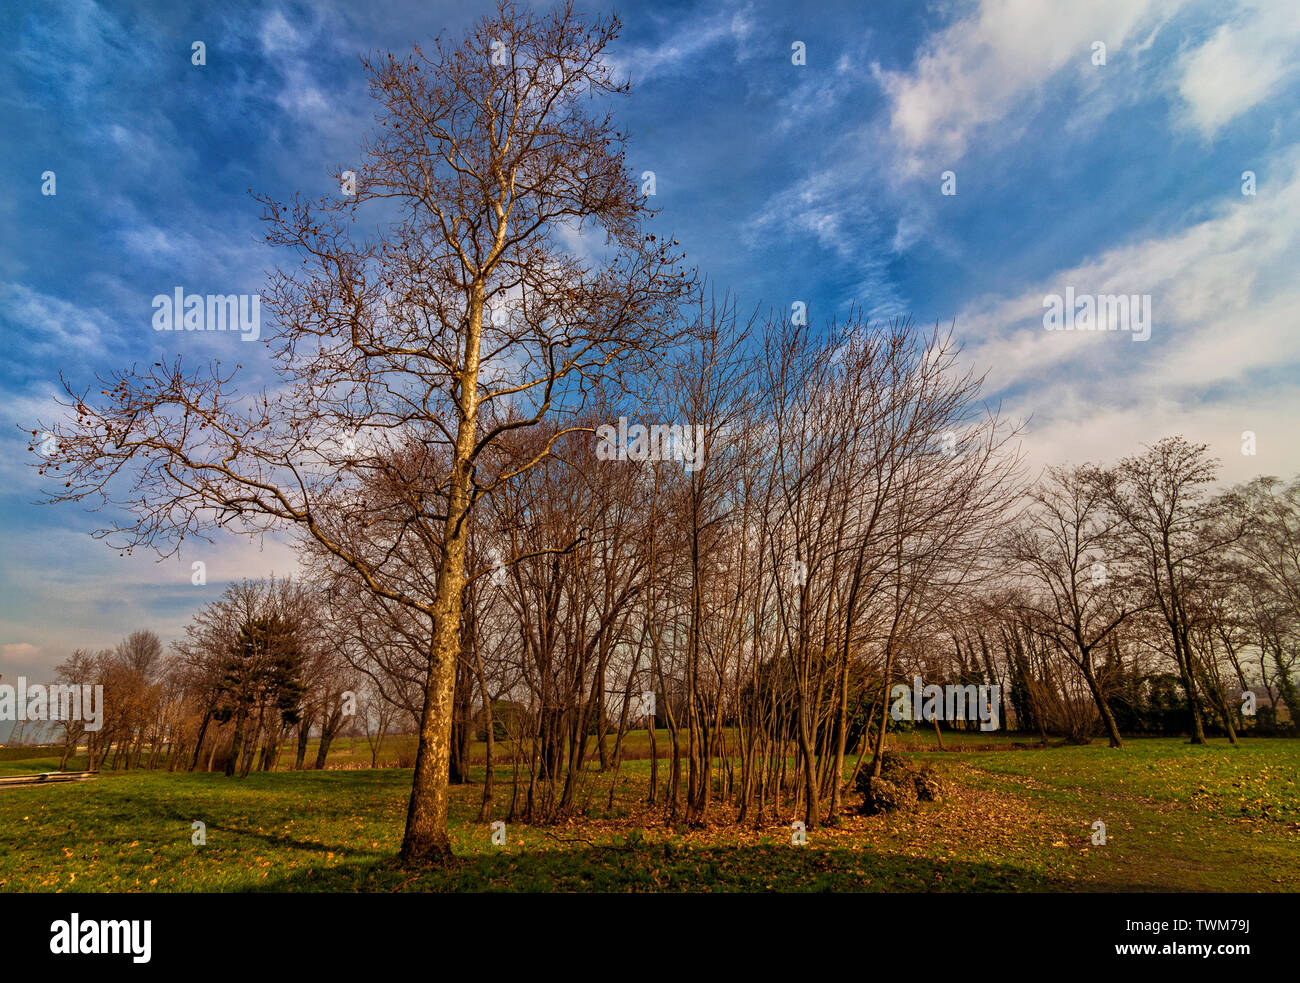 An Italian Countryside landscape on a bright sunny afternoon when the trees are kissing the deep blue sky with white clouds floating around.winter of Stock Photo